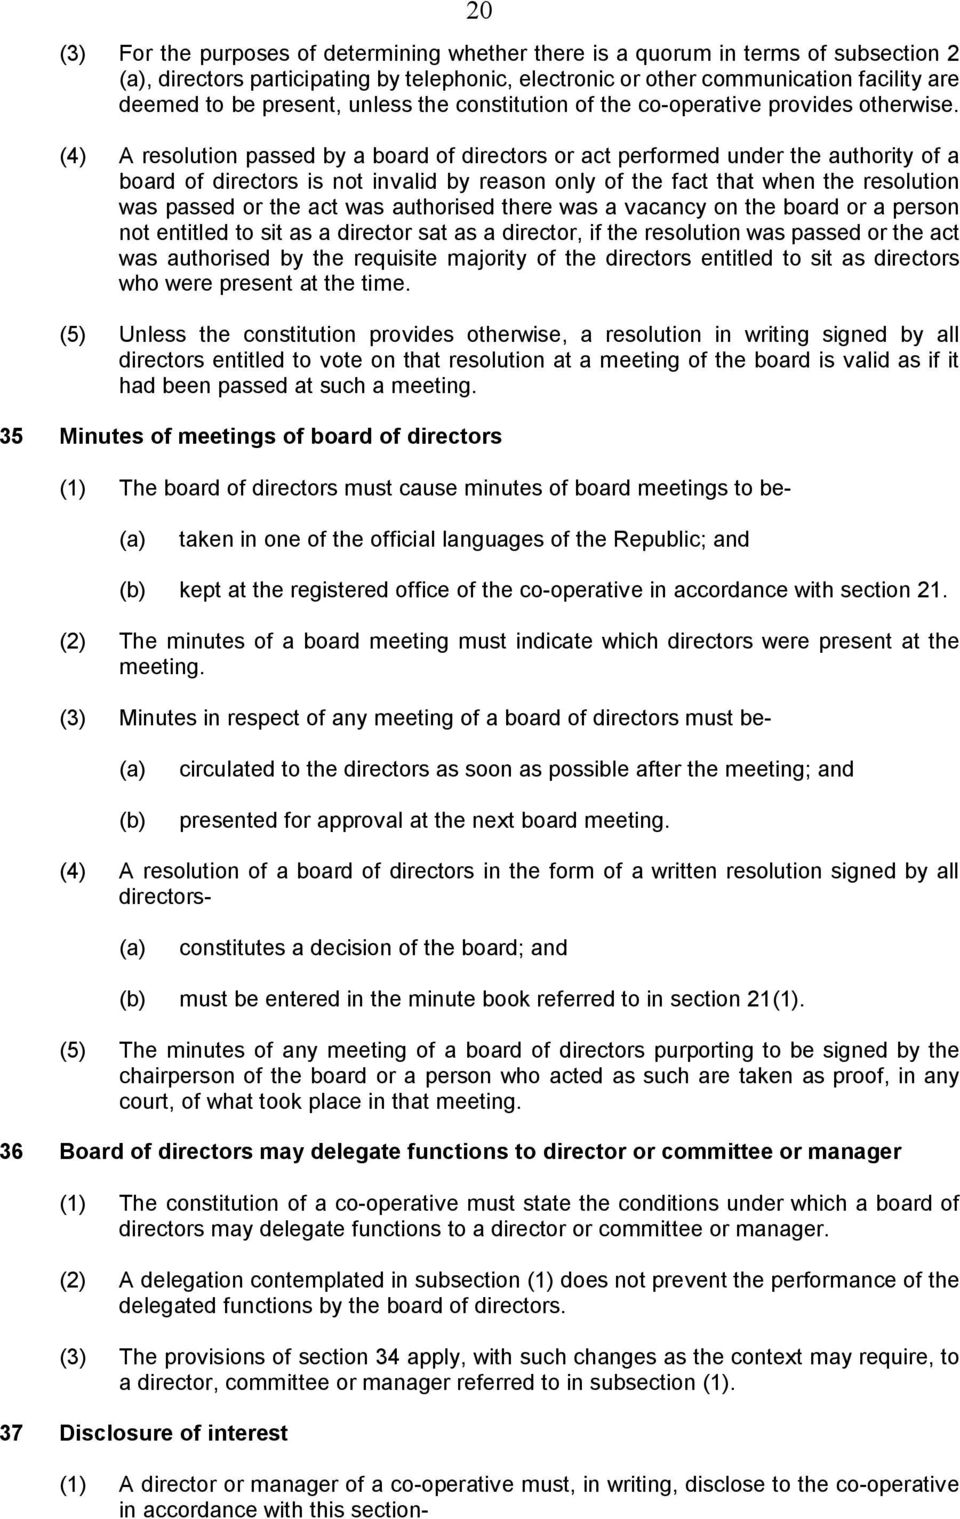 (4) A resolution passed by a board of directors or act performed under the authority of a board of directors is not invalid by reason only of the fact that when the resolution was passed or the act